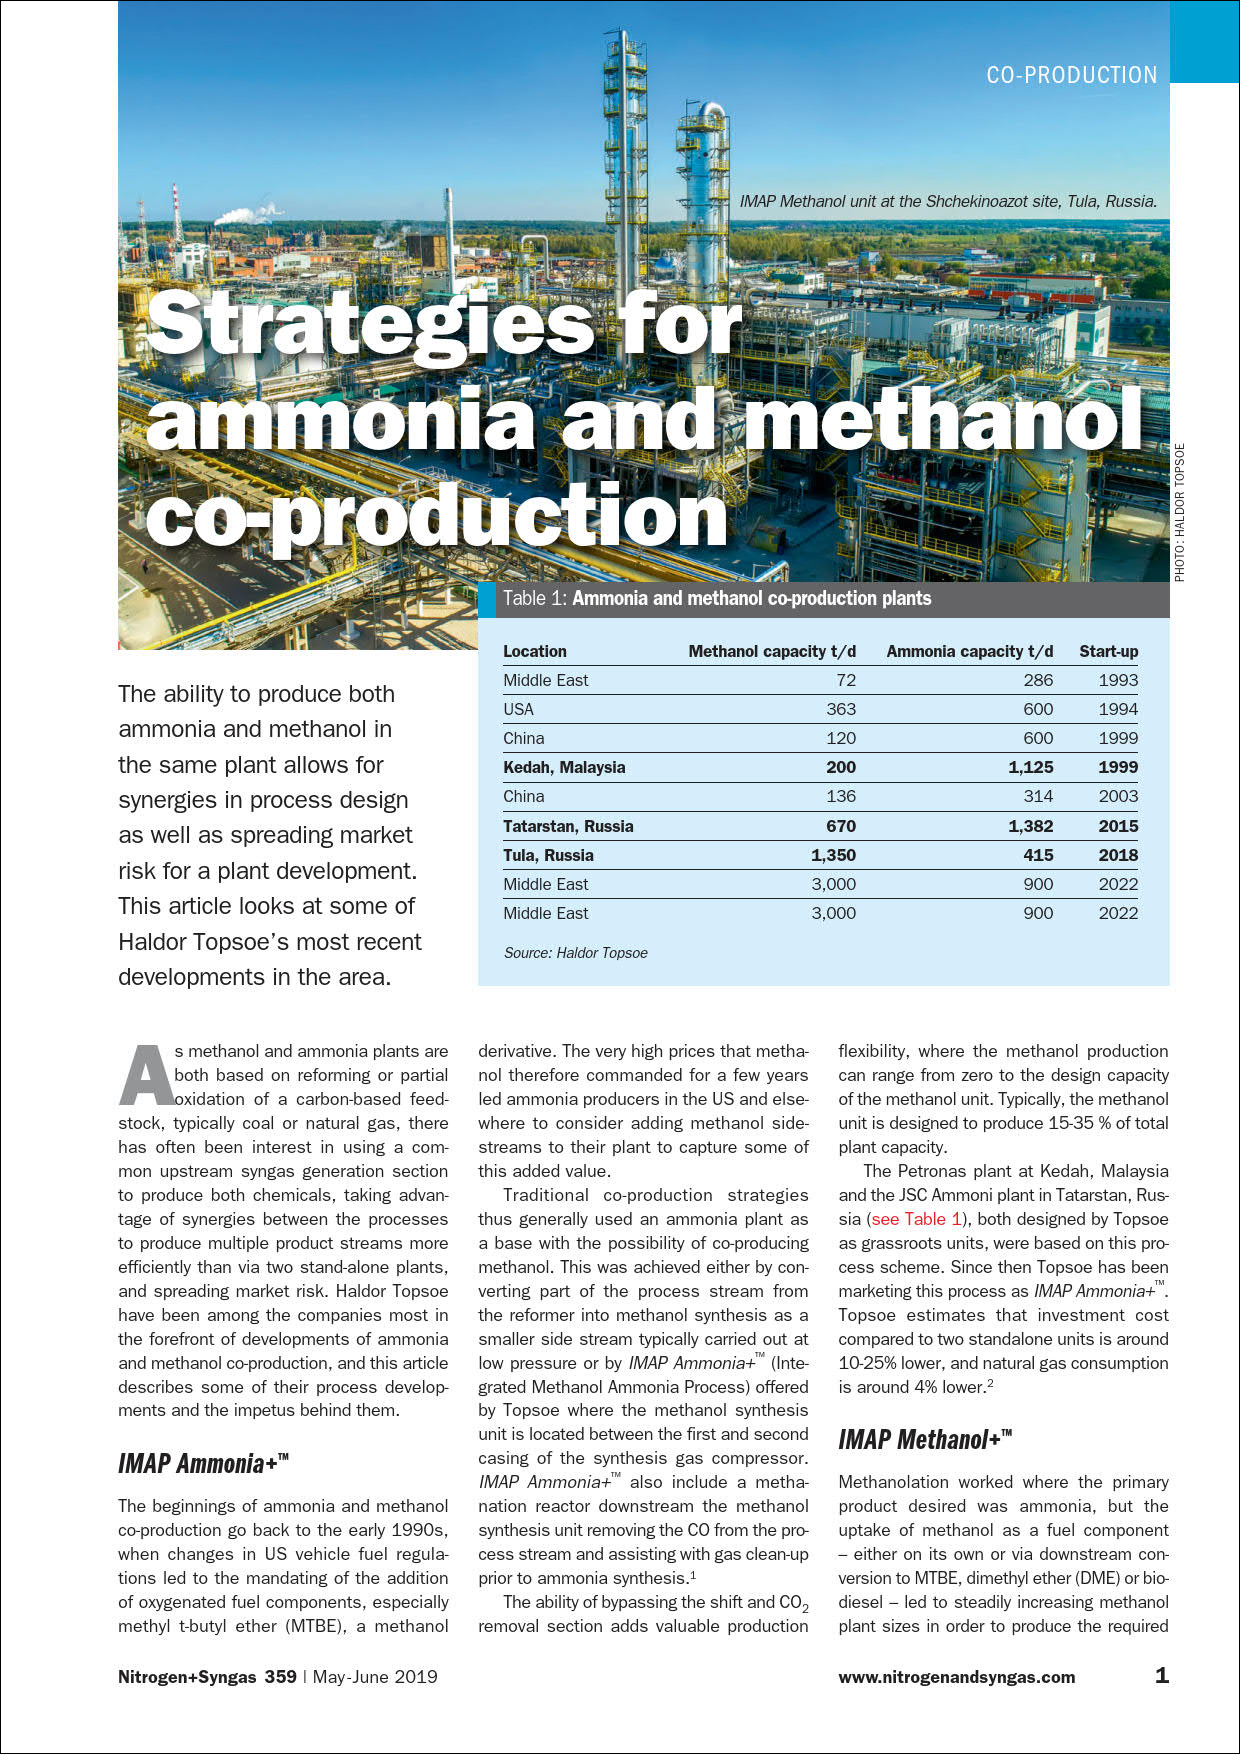 Strategies for ammonia and methanol co-production